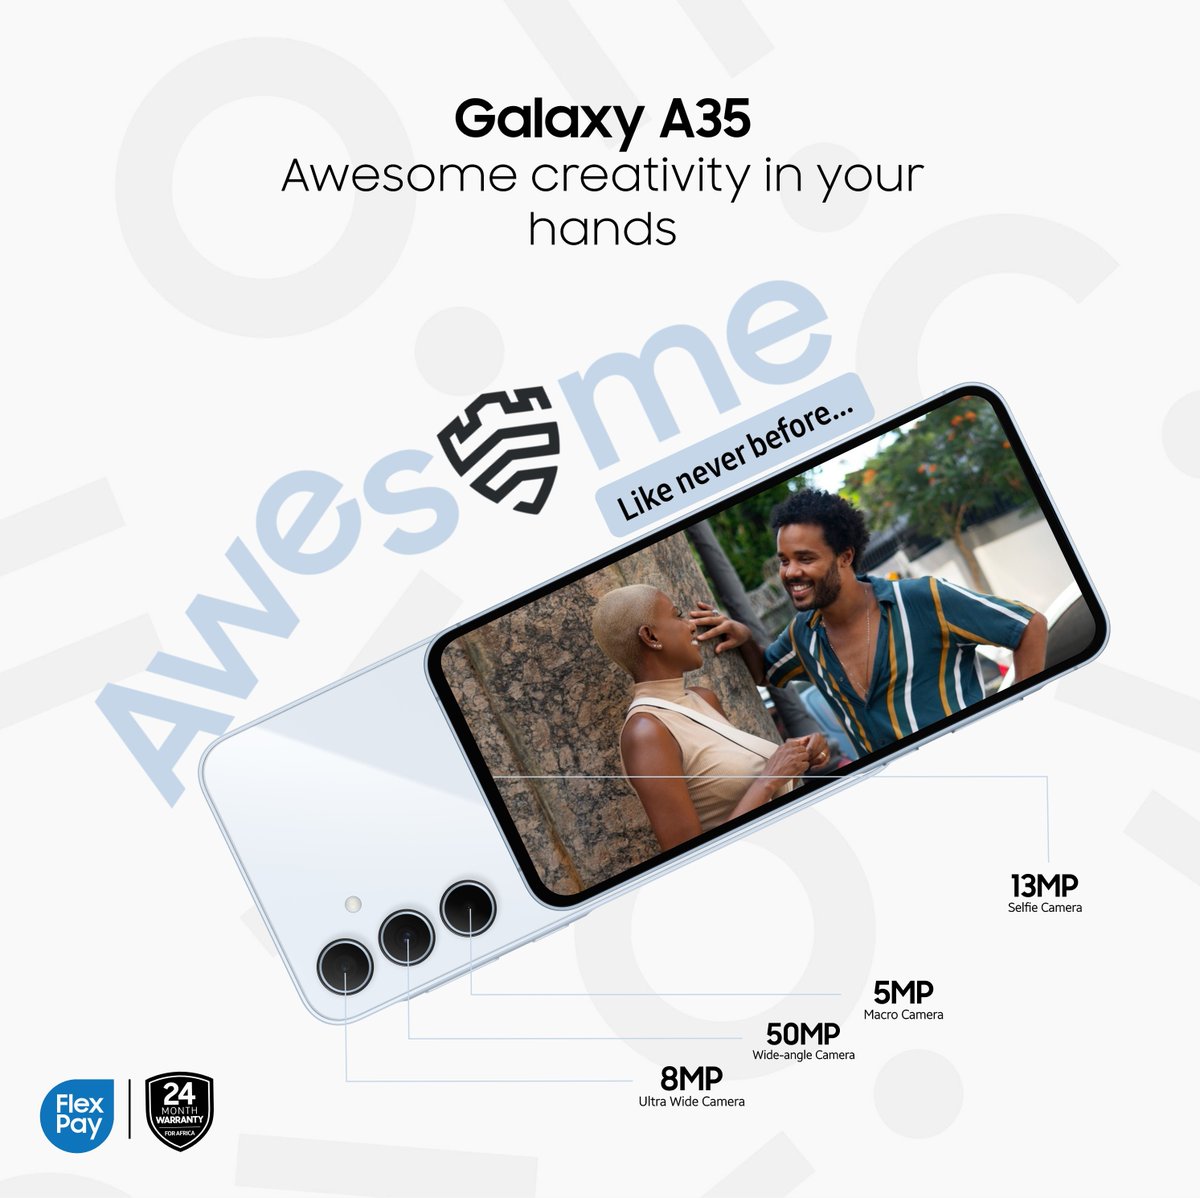 Create awesome cinematic reels with high-resolution cameras, 4-stabilization, and super HDR video on your Galaxy A35...

Every reel is bound to be #AwesomeLikeNeverBefore!

Available at a Samsung authorized store near you.

#GalaxyA35
#SamsungNigeria